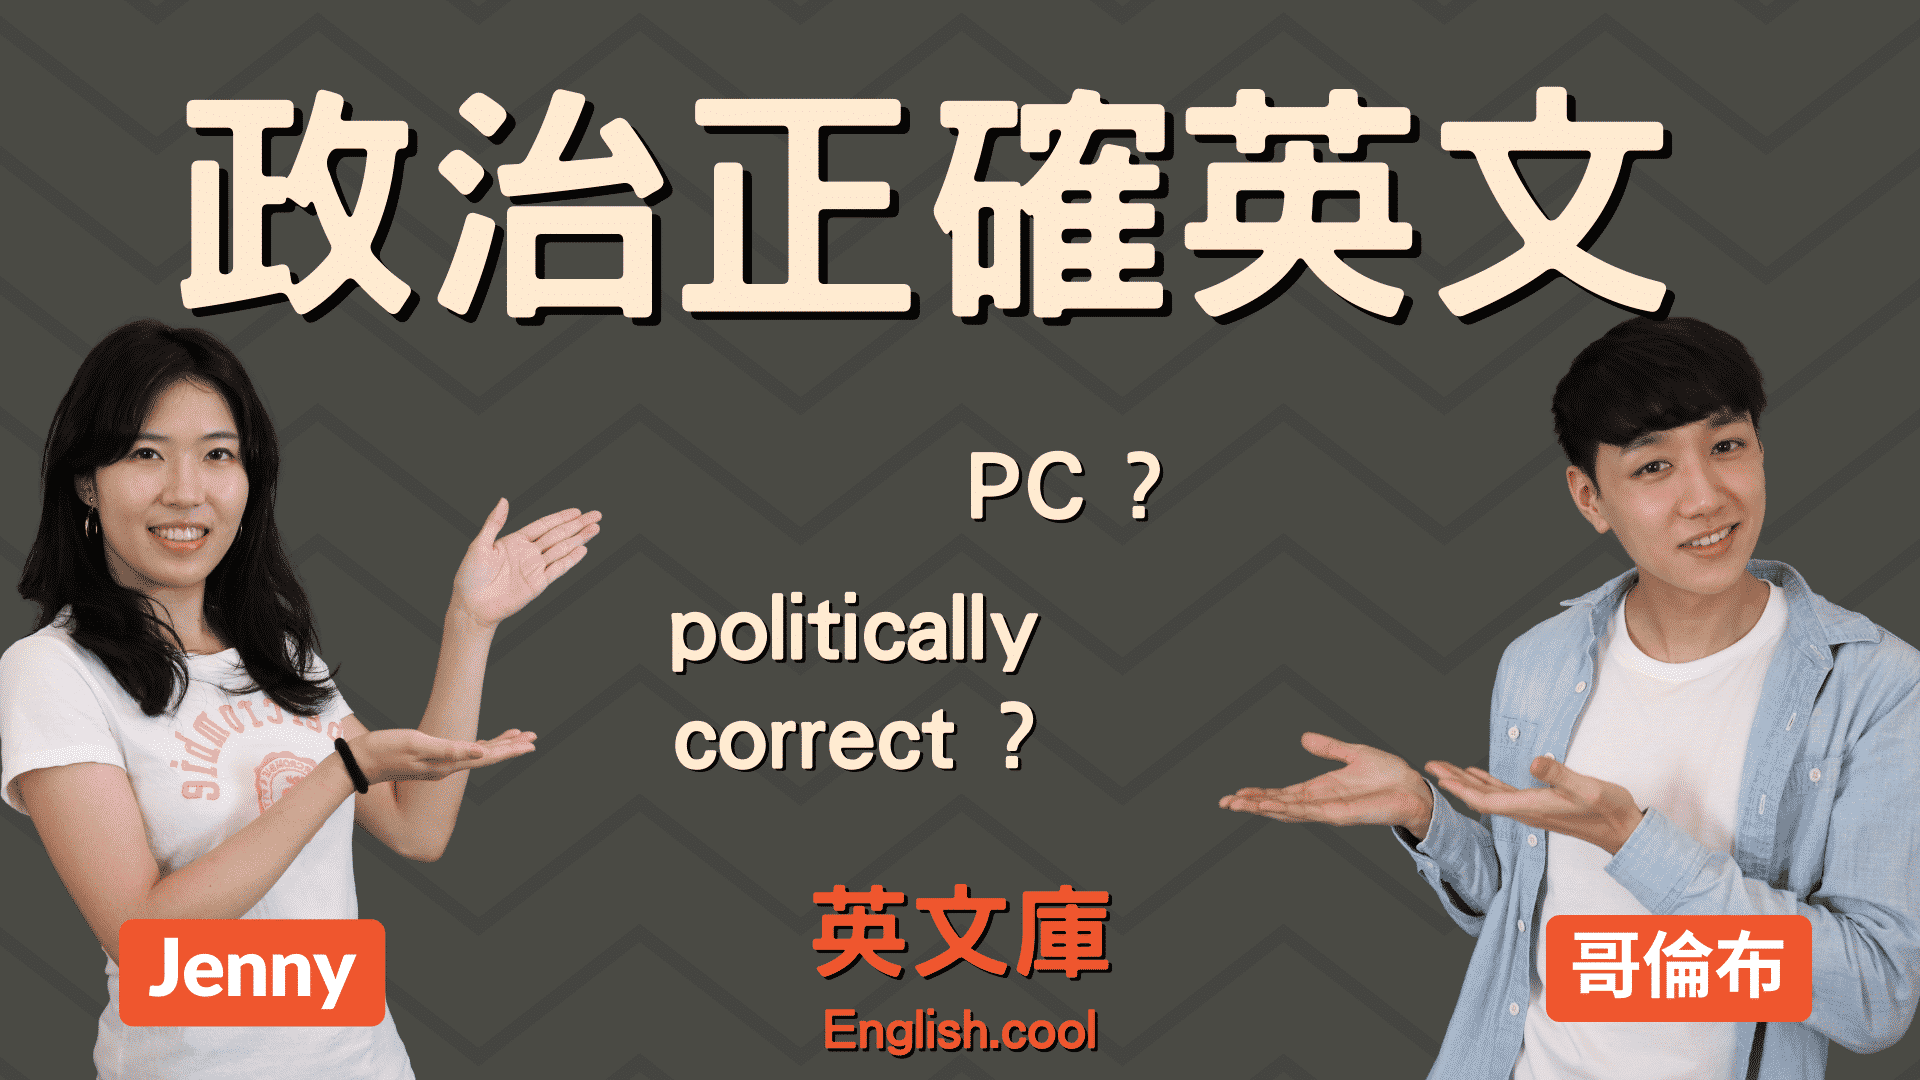 You are currently viewing 【政治正確英文】PC (Political Correctness) 是什麼意思？